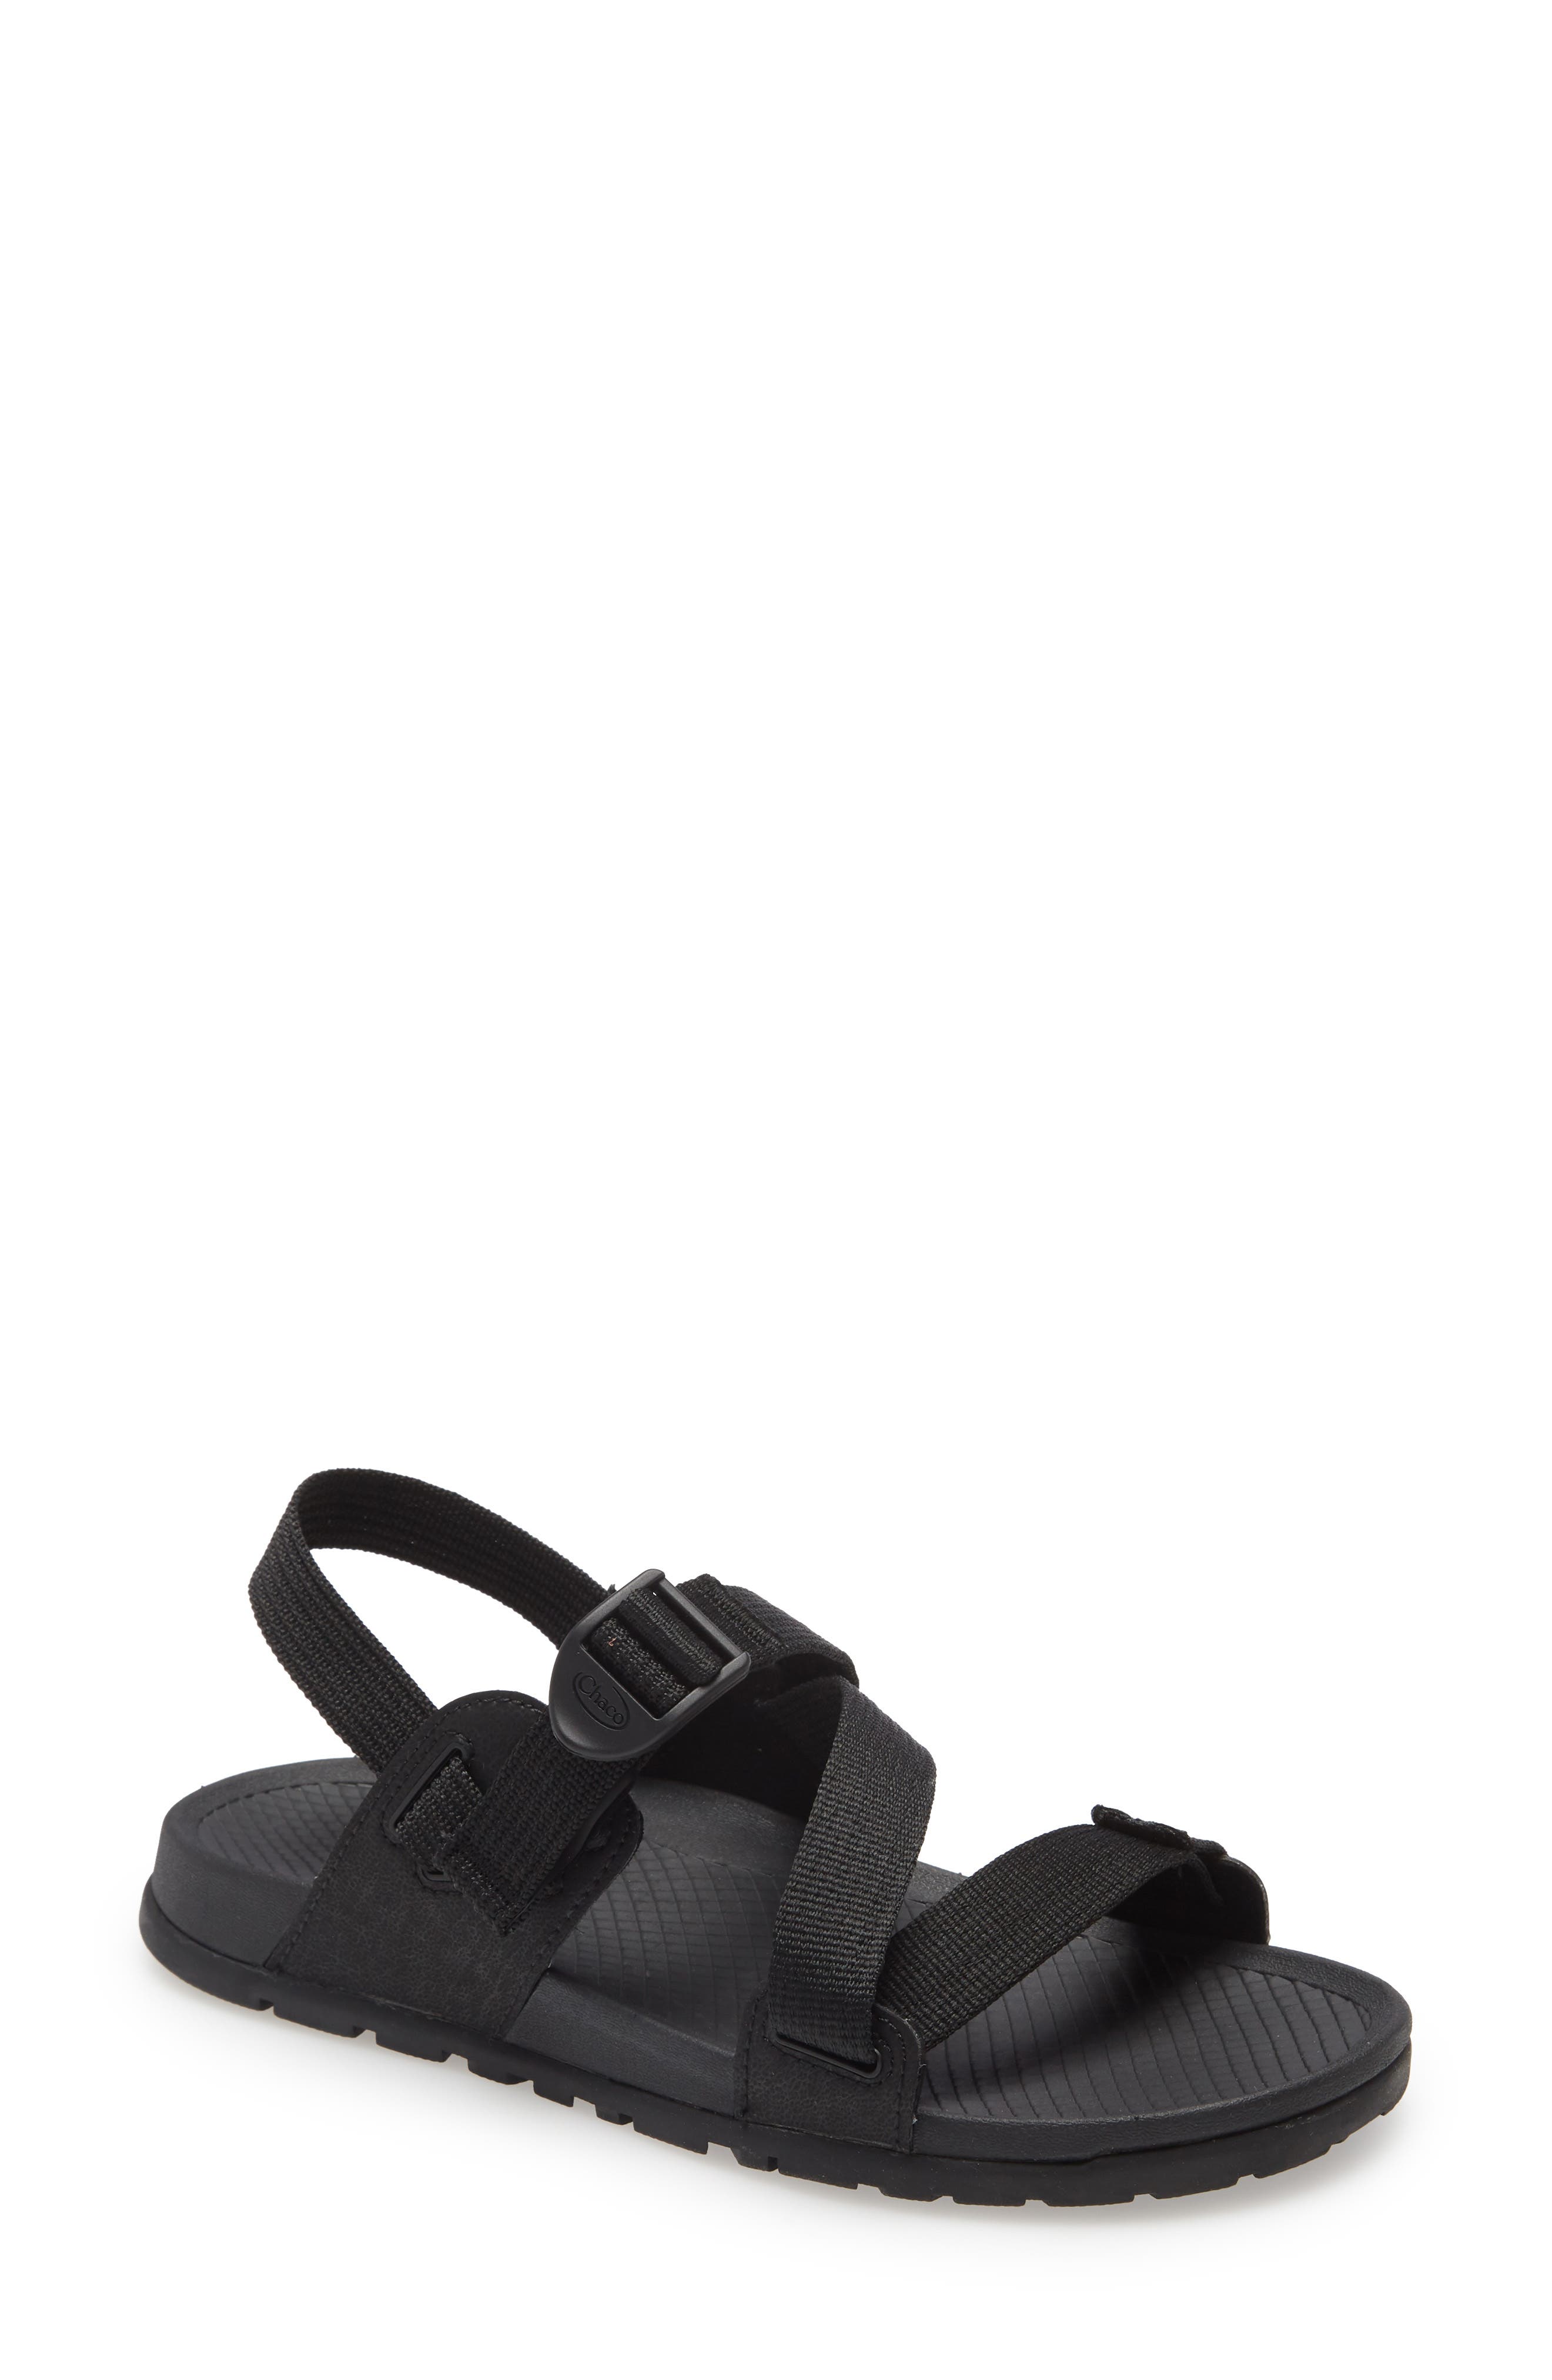 chacos size 6 womens